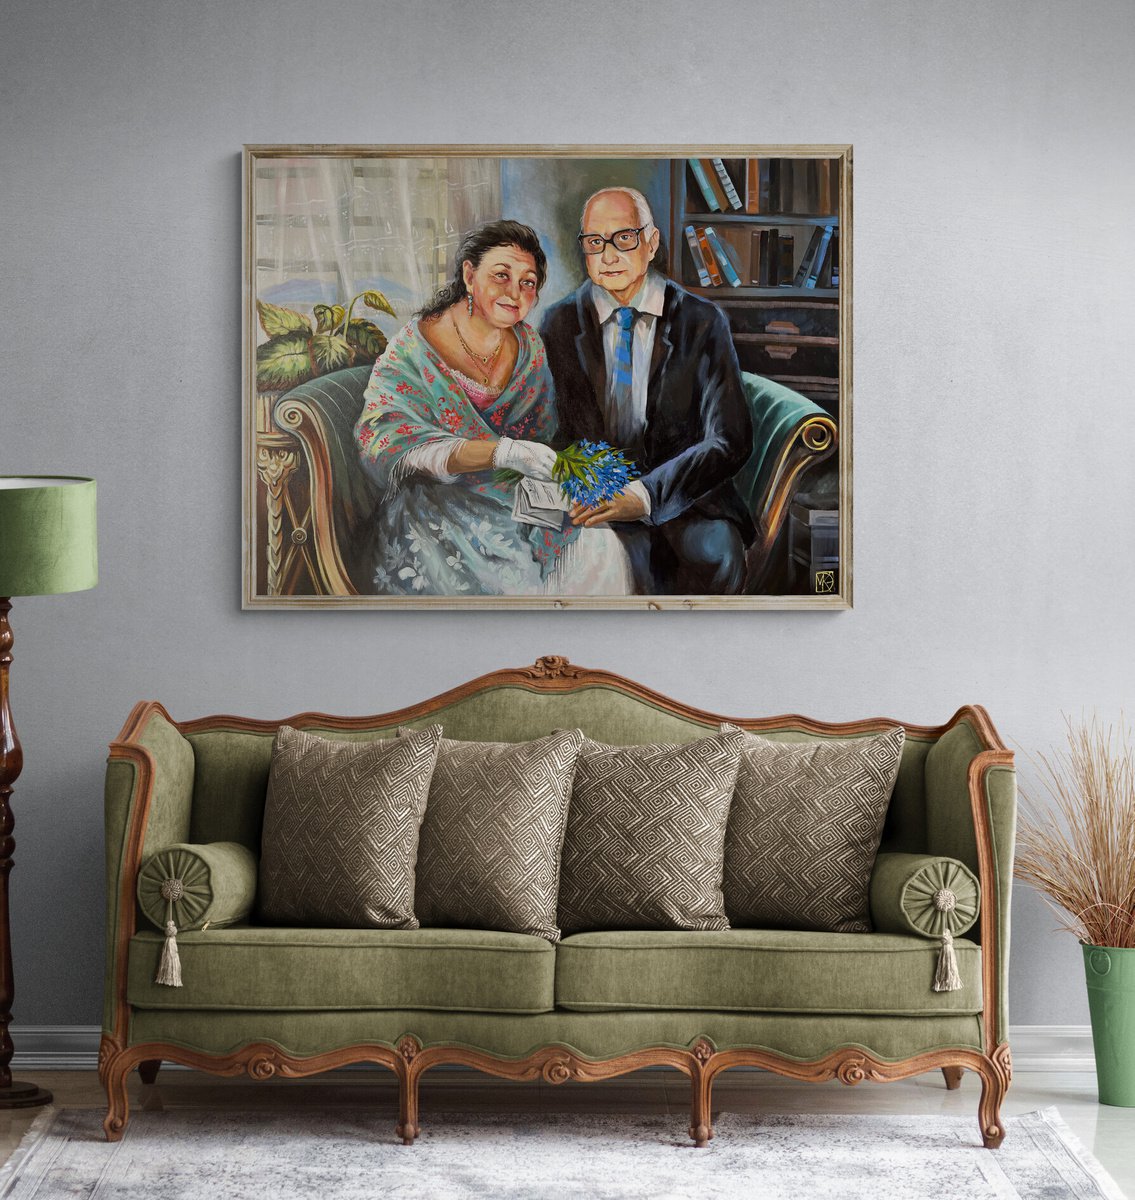 Married couple (portrait commission from a photo) by Maria Kireev